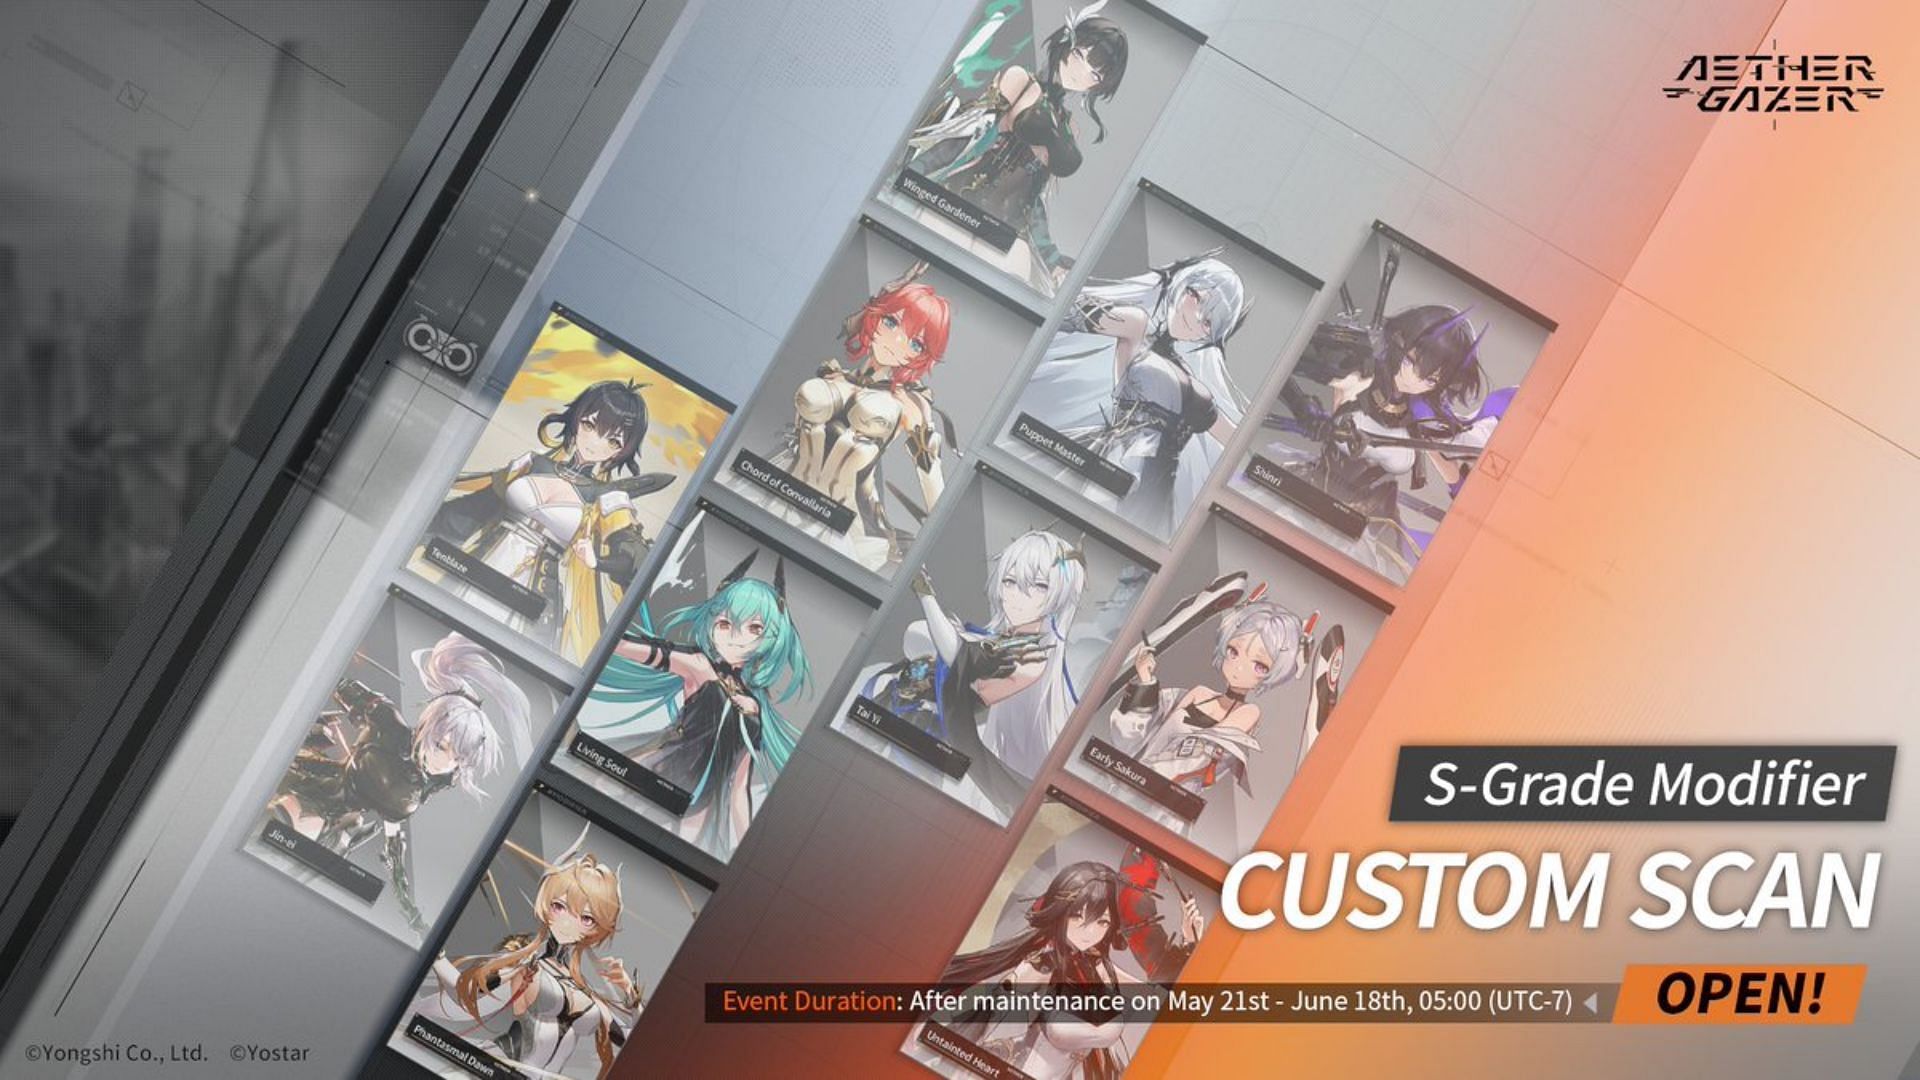 Custom Scan event lets players choose one from a pool of 25 Modifiers for a Rate-Up. (Image via Yostar)